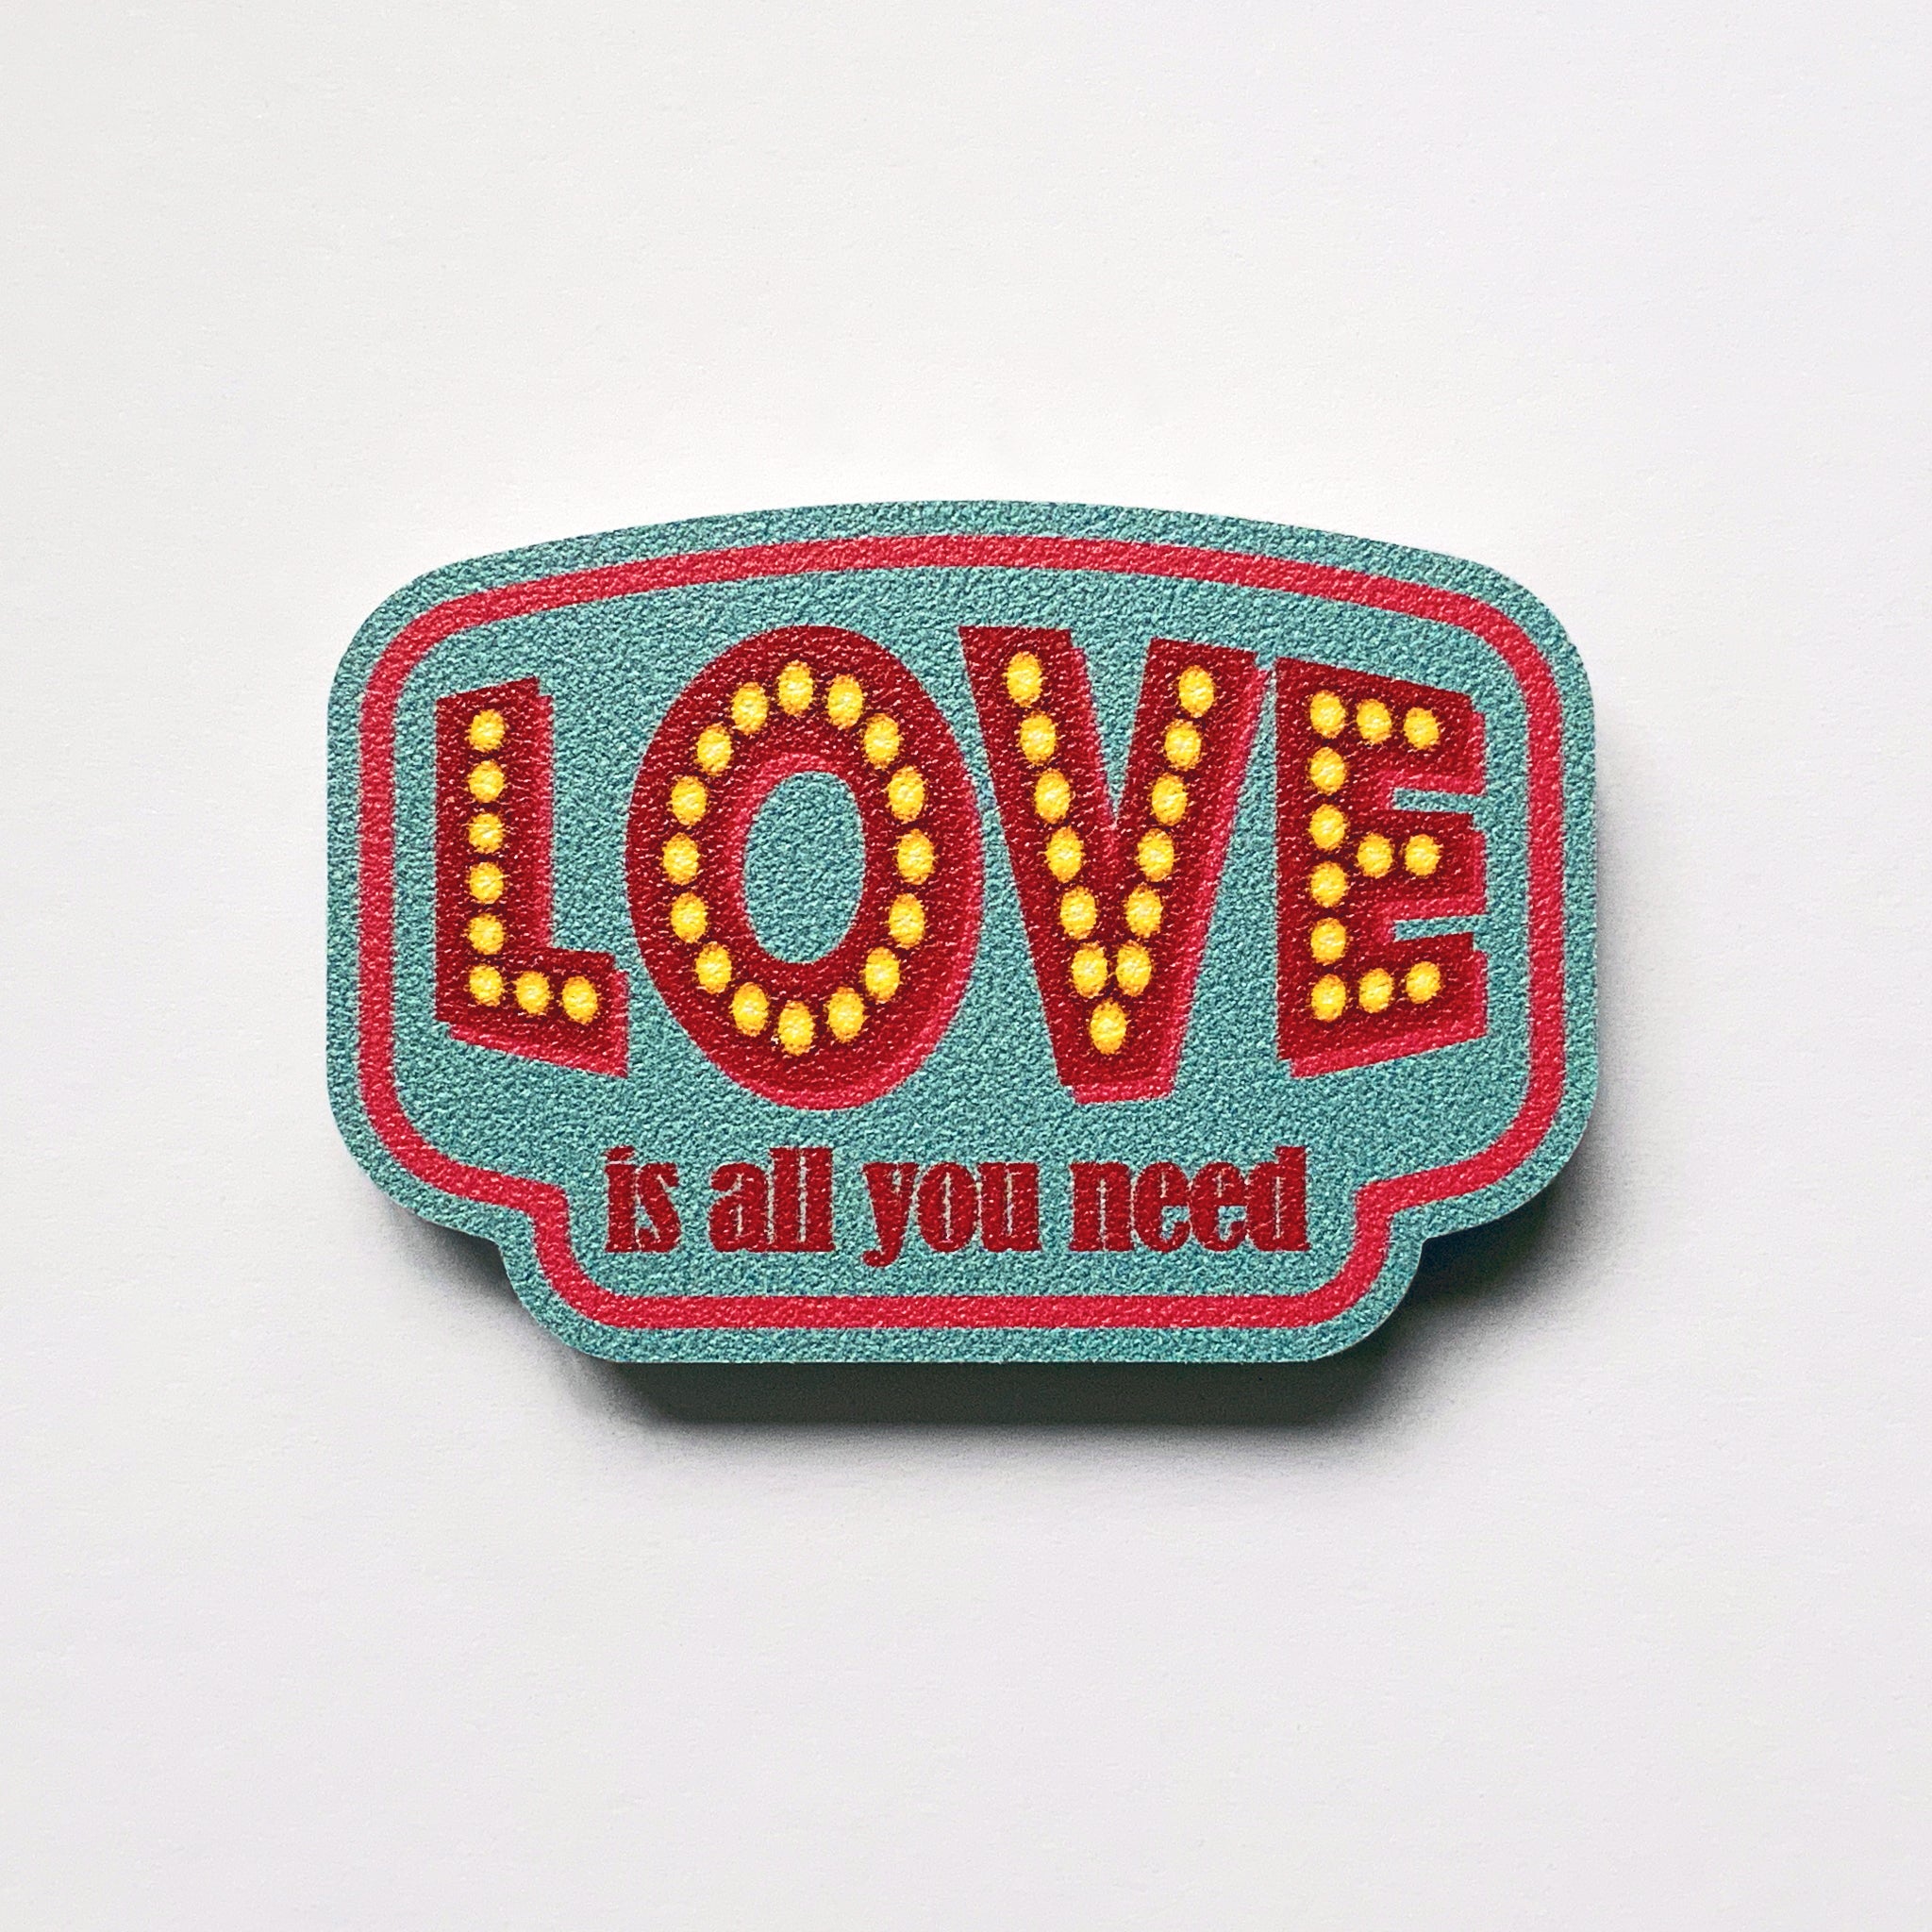 A vintage label love is all you need shaped plywood fridge magnet by Beyond the Fridge